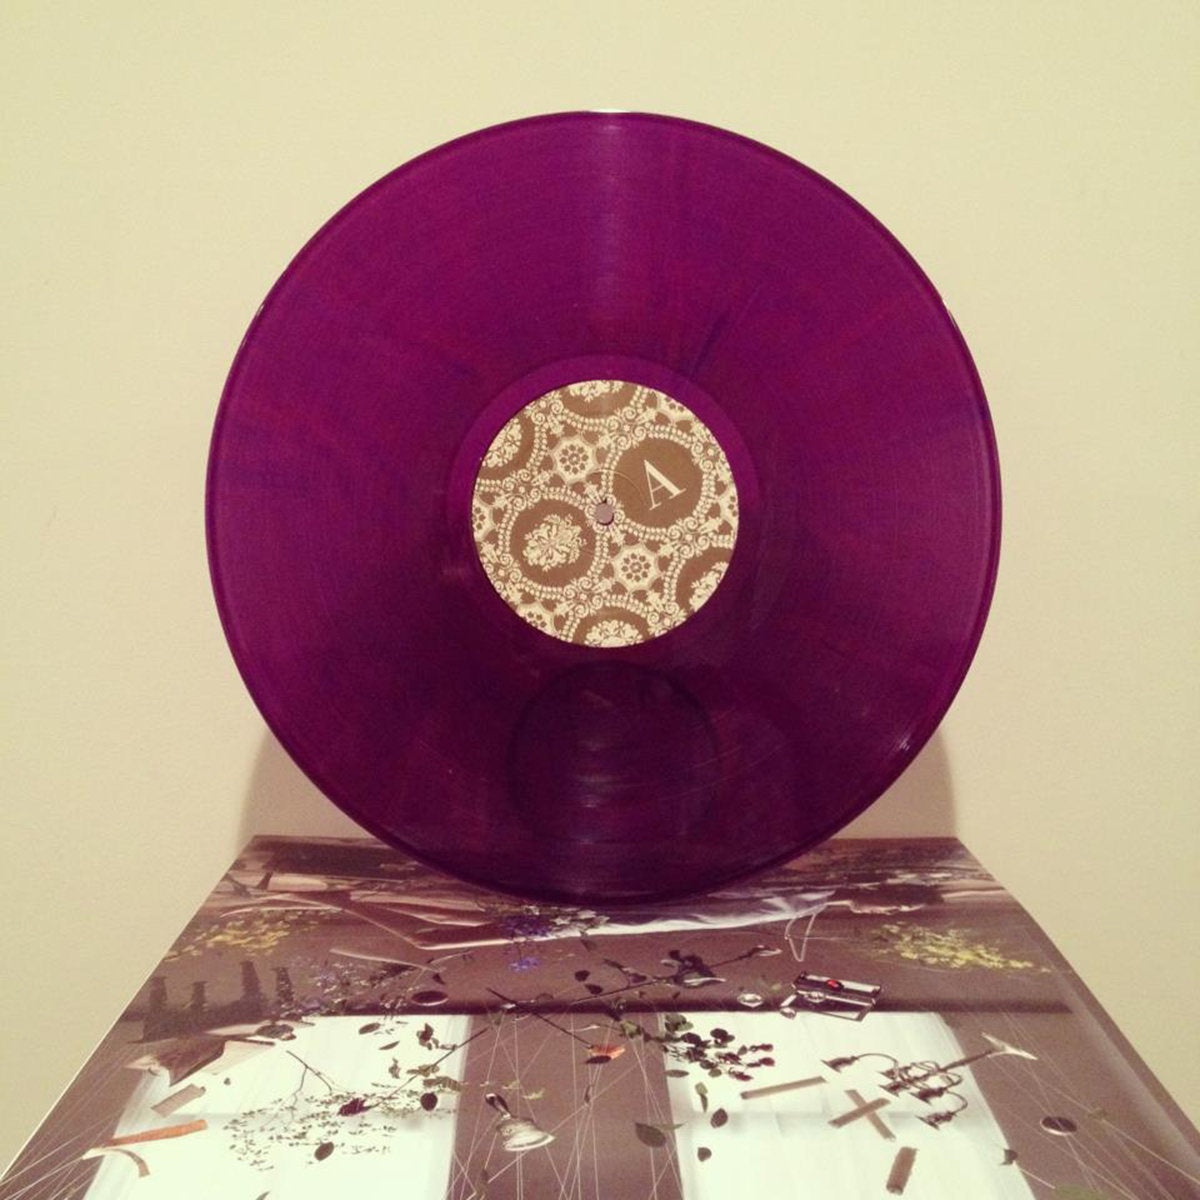 Sun Airway - Soft Fall - New LP Record 2012 Dead Oceans Clear Purple Vinyl, Poster & Download  - Experimental Rock